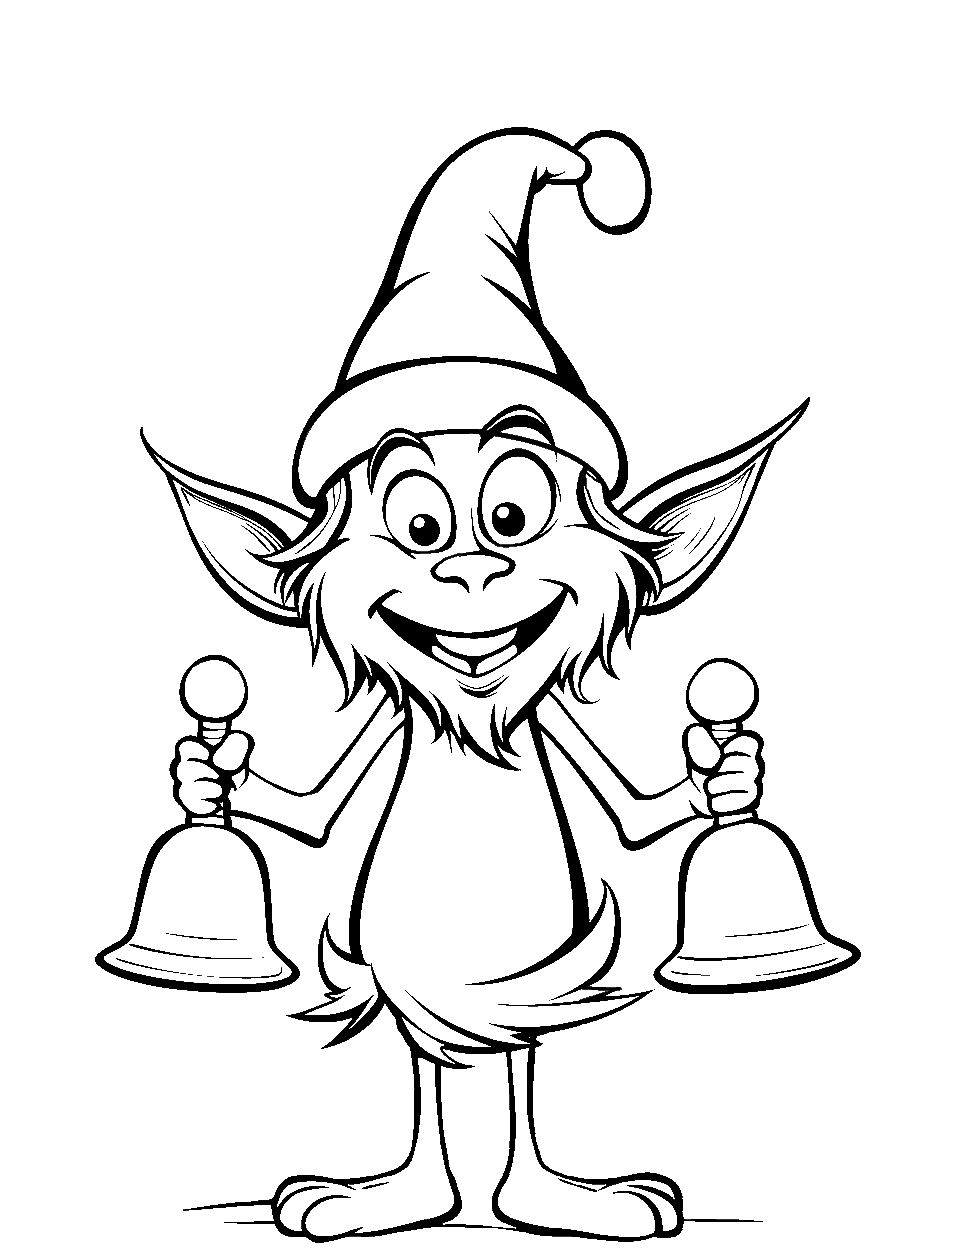 Sleighbell Ringing Coloring Page - The Grinch’s Minion is ringing a sleigh bell with a smile on his face.